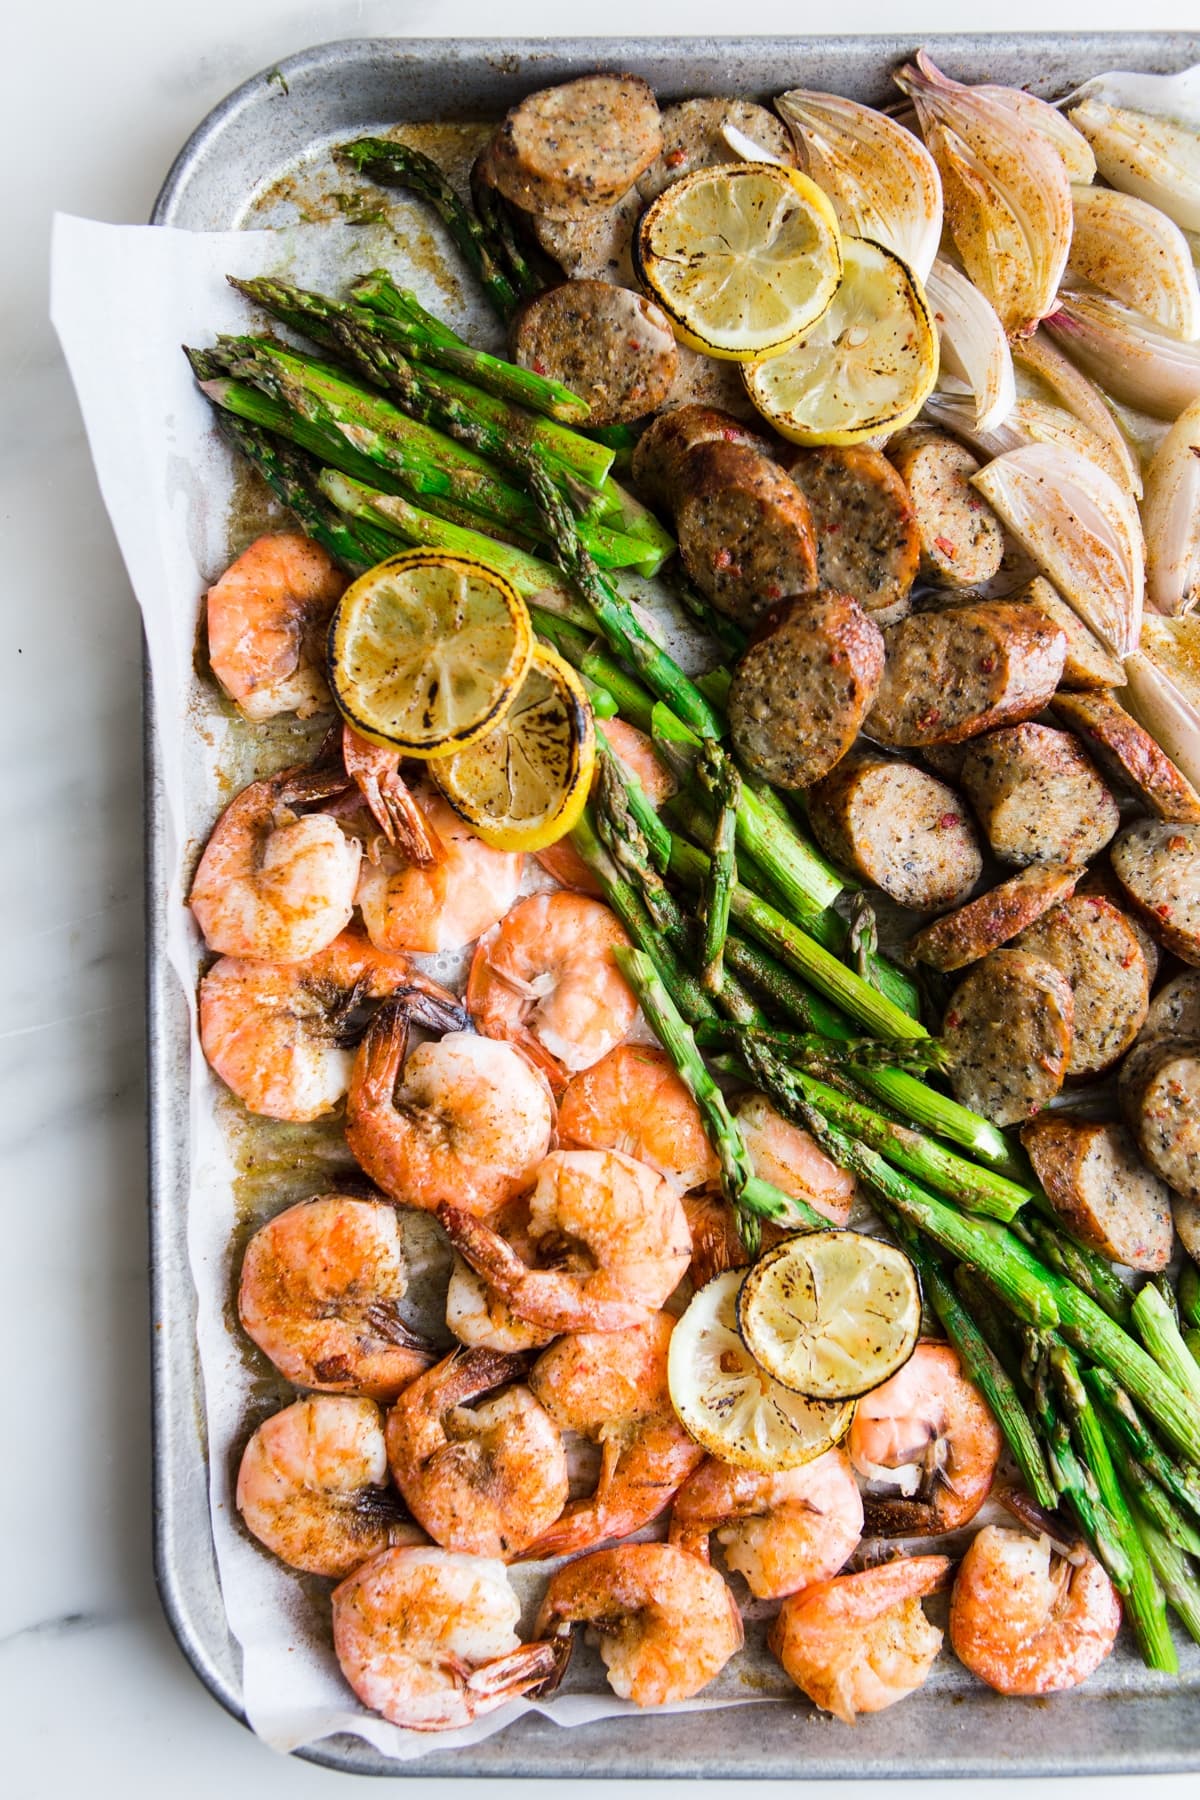 Whole30 approved shrimp and sausage sheet pan dinner with asparagus